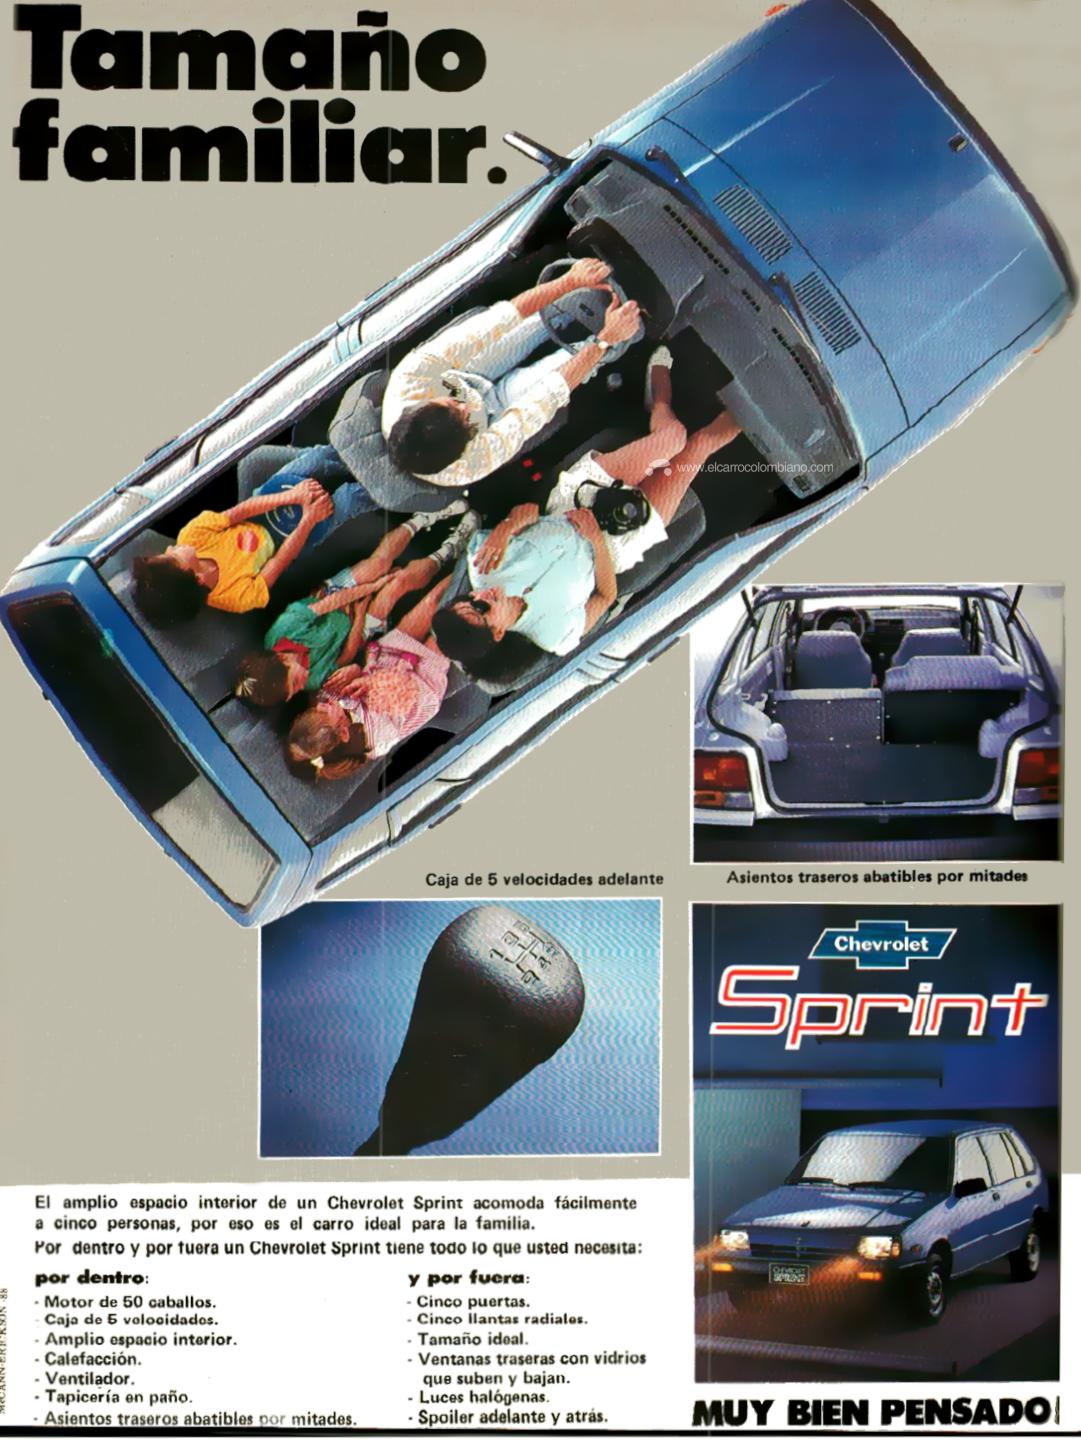 chevrolet sprint, chevrolet sprint colombia, chevrolet sprint publicidad en colombia, chevrolet sprint 1989, chevrolet sprint historia en colombia, suzuki forsa 1986, chevrolet sprint colmotores, chevrolet sprint bien pensado, quiero mi sprint, publicidad antigua de carros en colombia, publicidad antigua de colombia